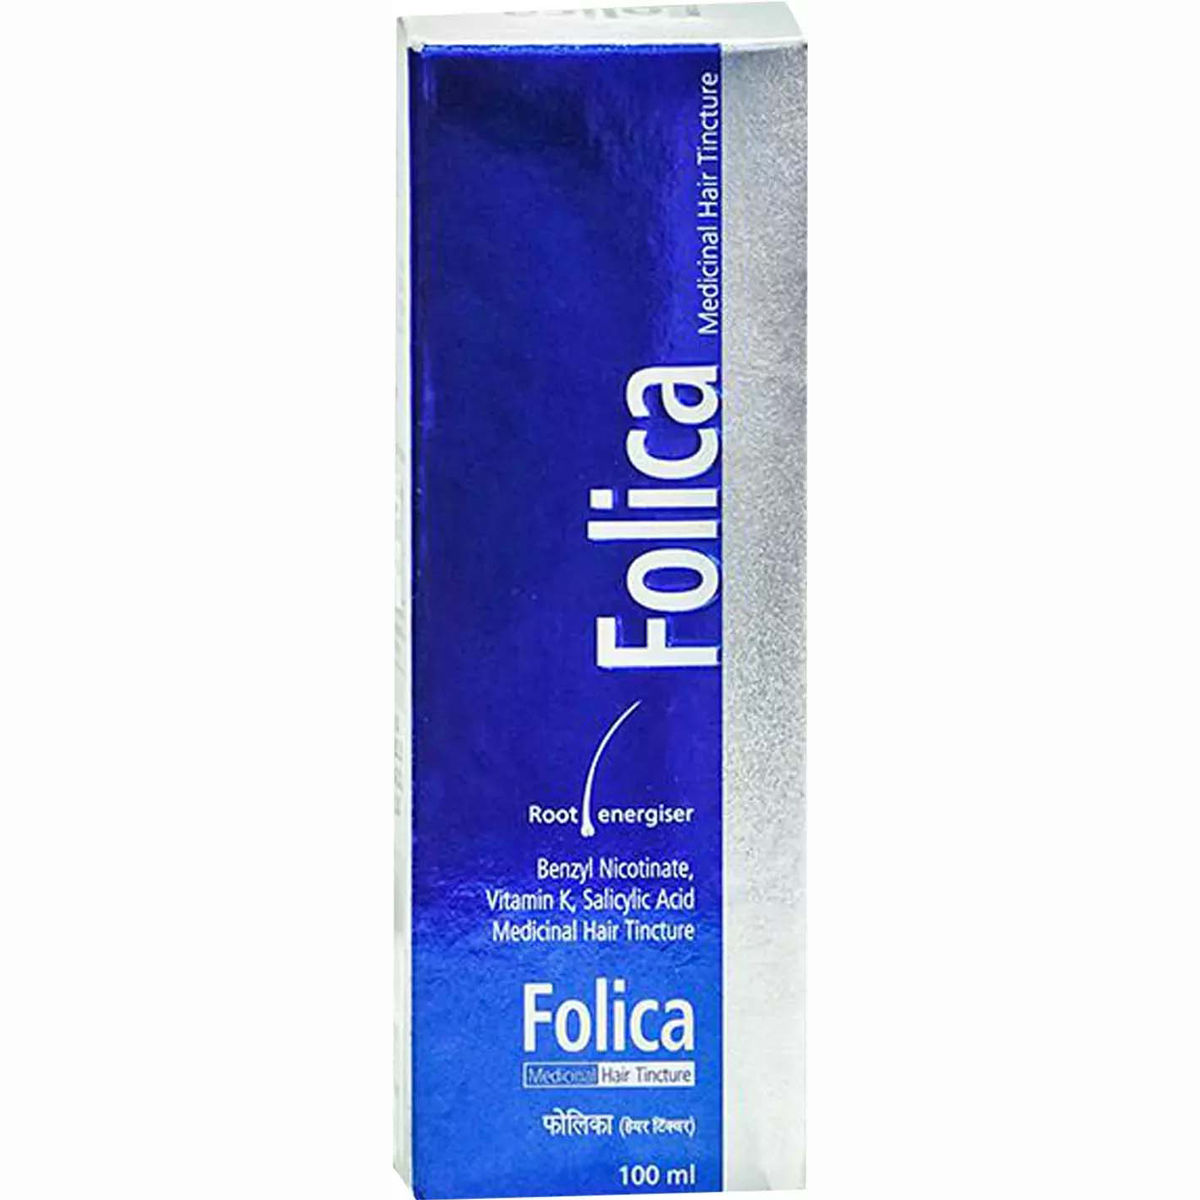 Folica Medicinal Hair Tincture, 100 ml Price, Uses, Side Effects,  Composition - Apollo Pharmacy